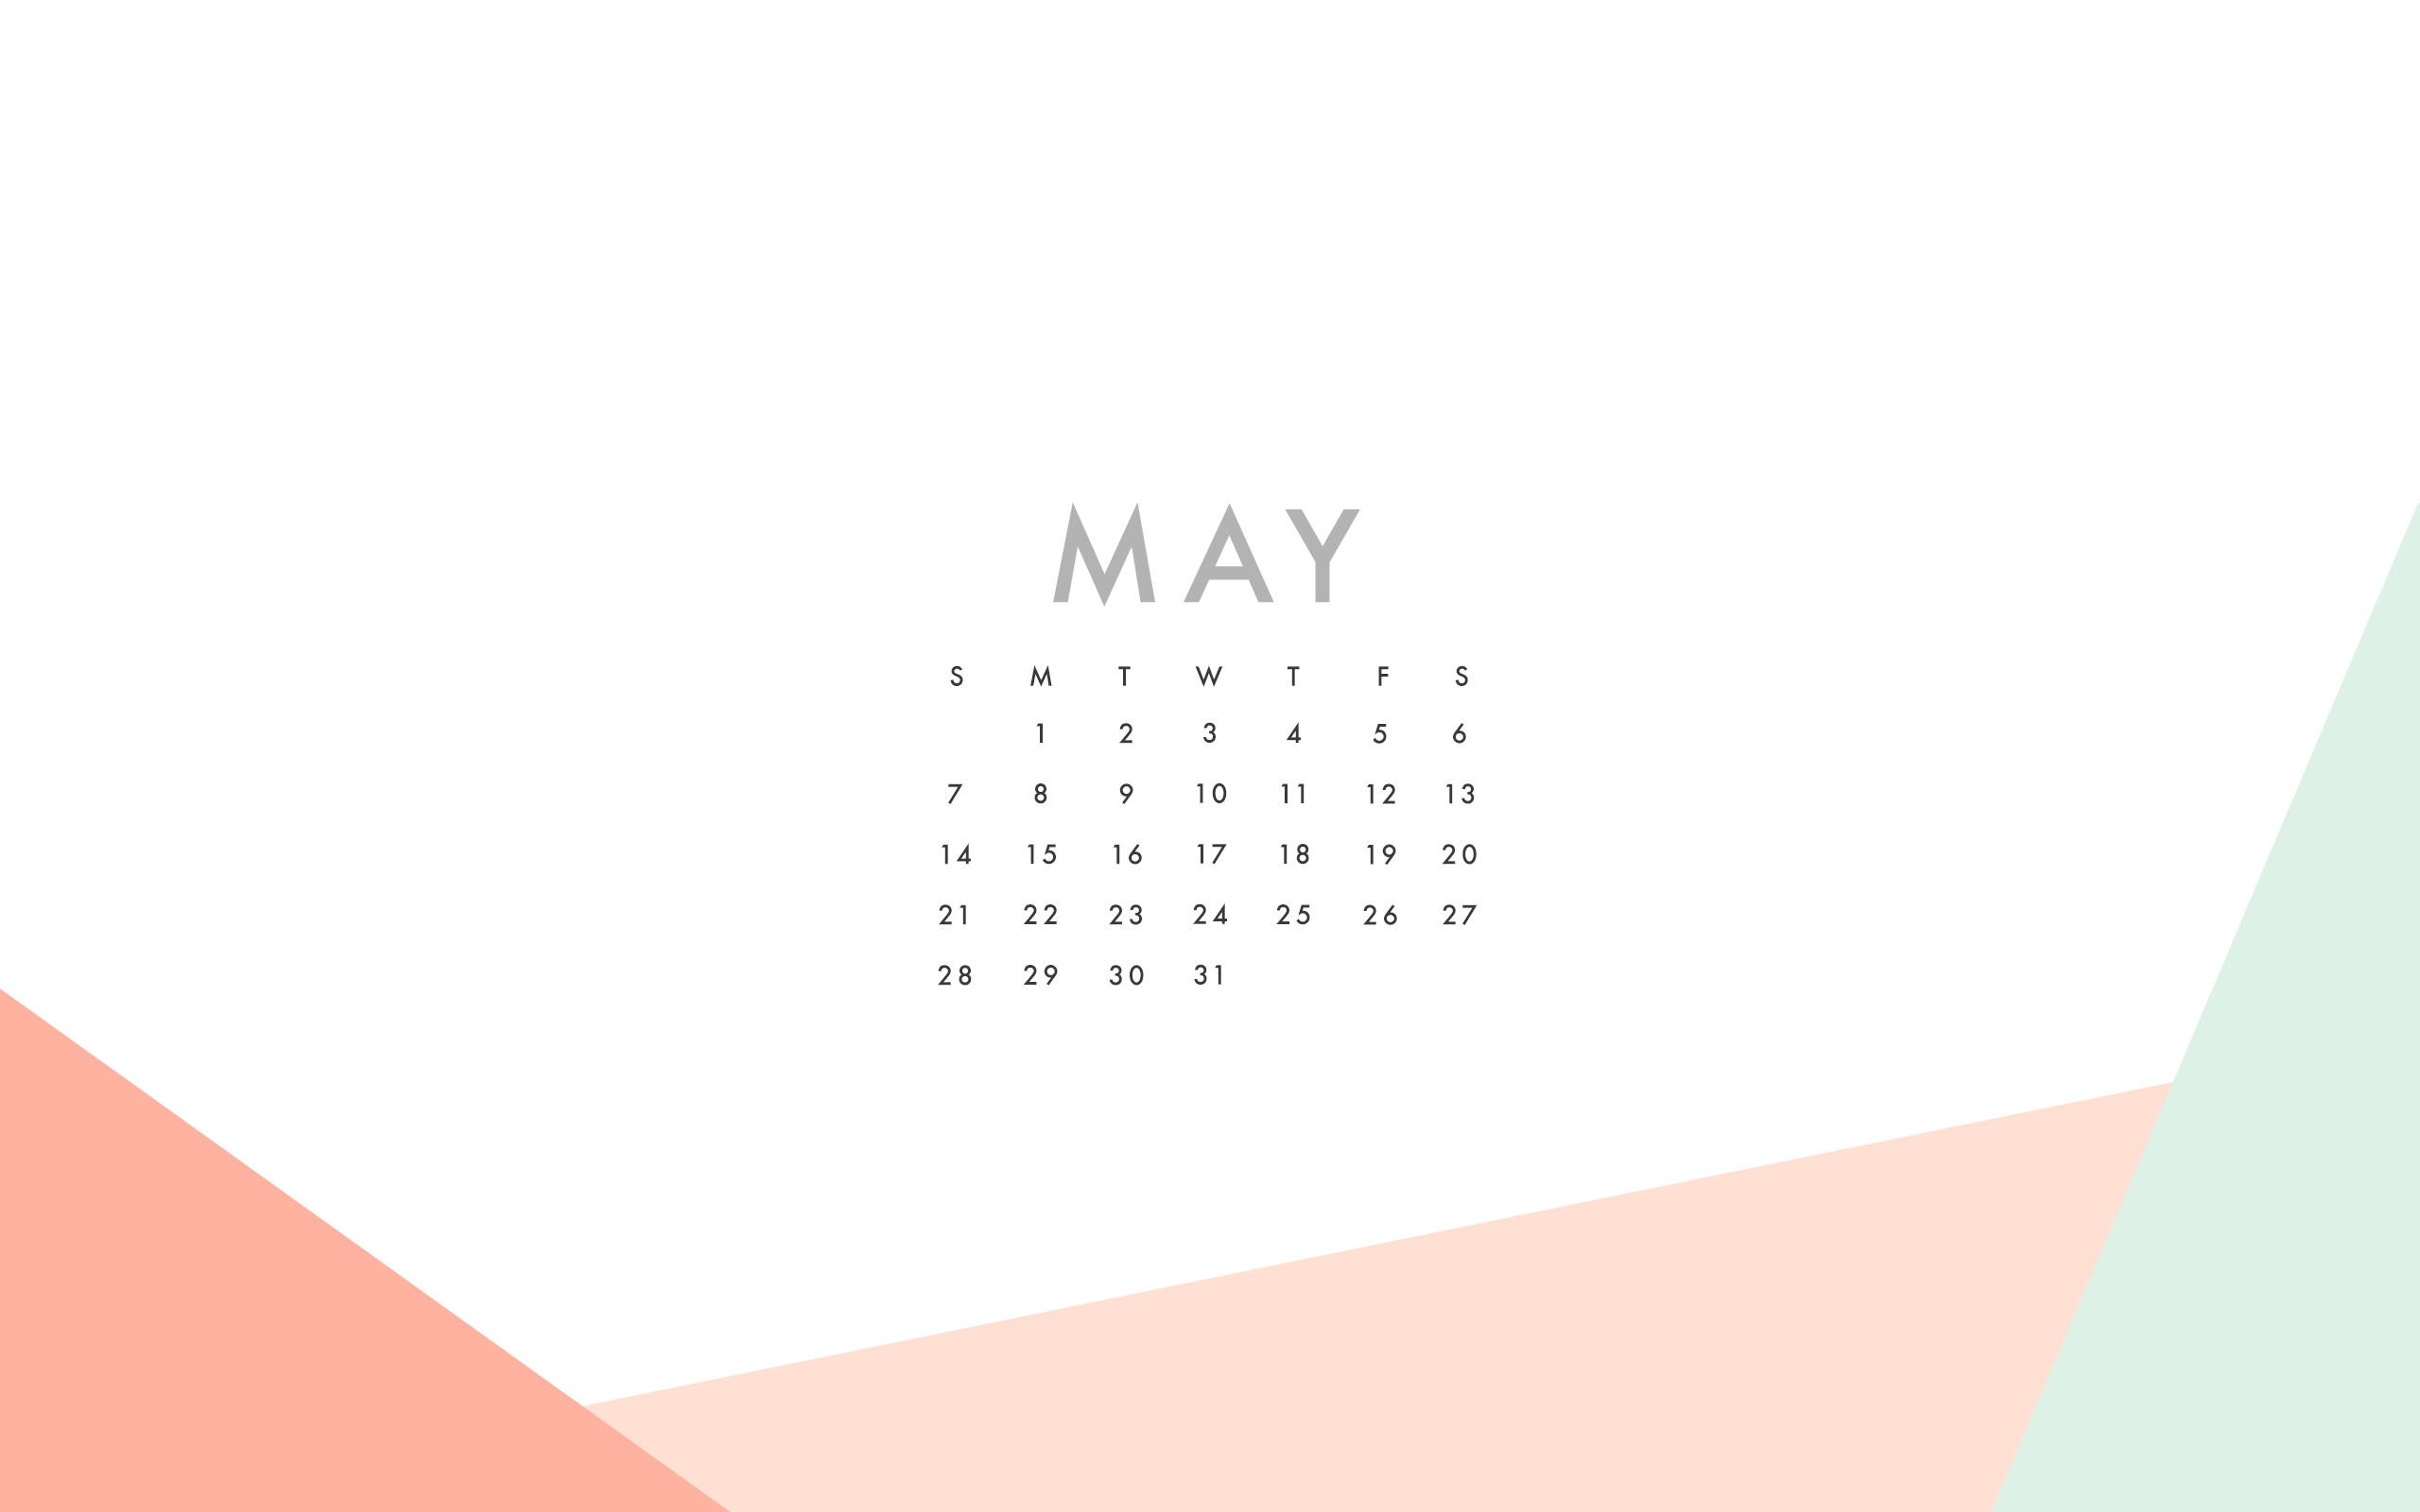 2560x1600 May Desktop Calendar from The Blog Market (click here to download)